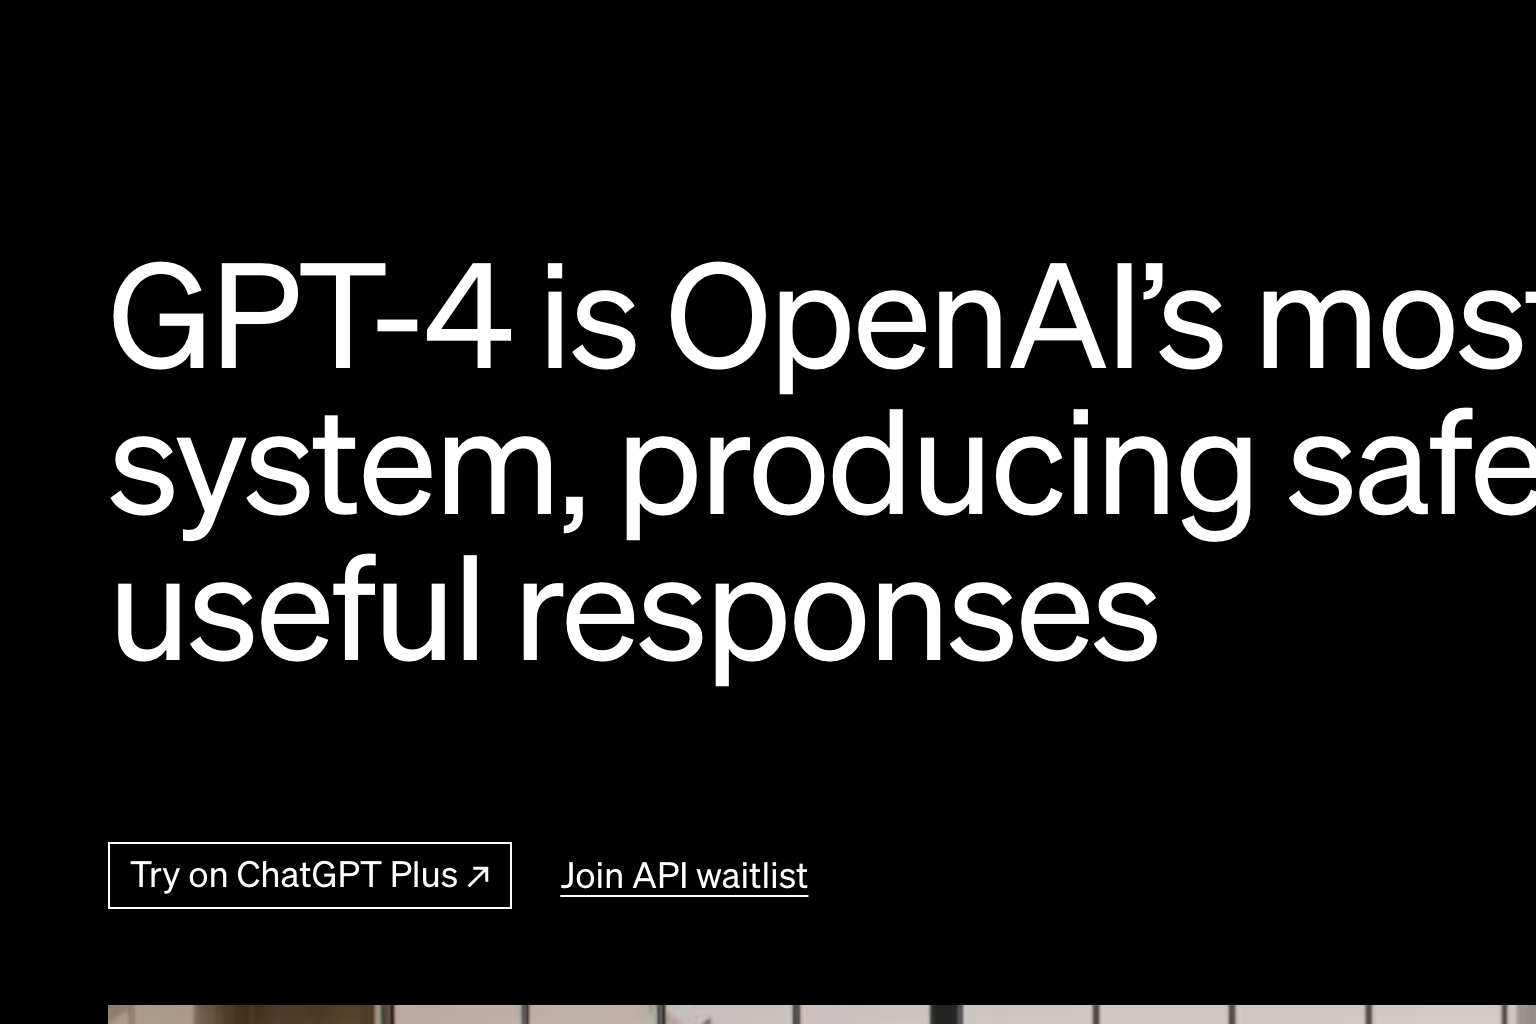 Discover the game-changing capabilities of GPT-4, the next generation of AI language models. Explore its advanced reasoning, multimodal inputs, and academic performance. See how it's already being used in various industries and whether upgrading is right for you.